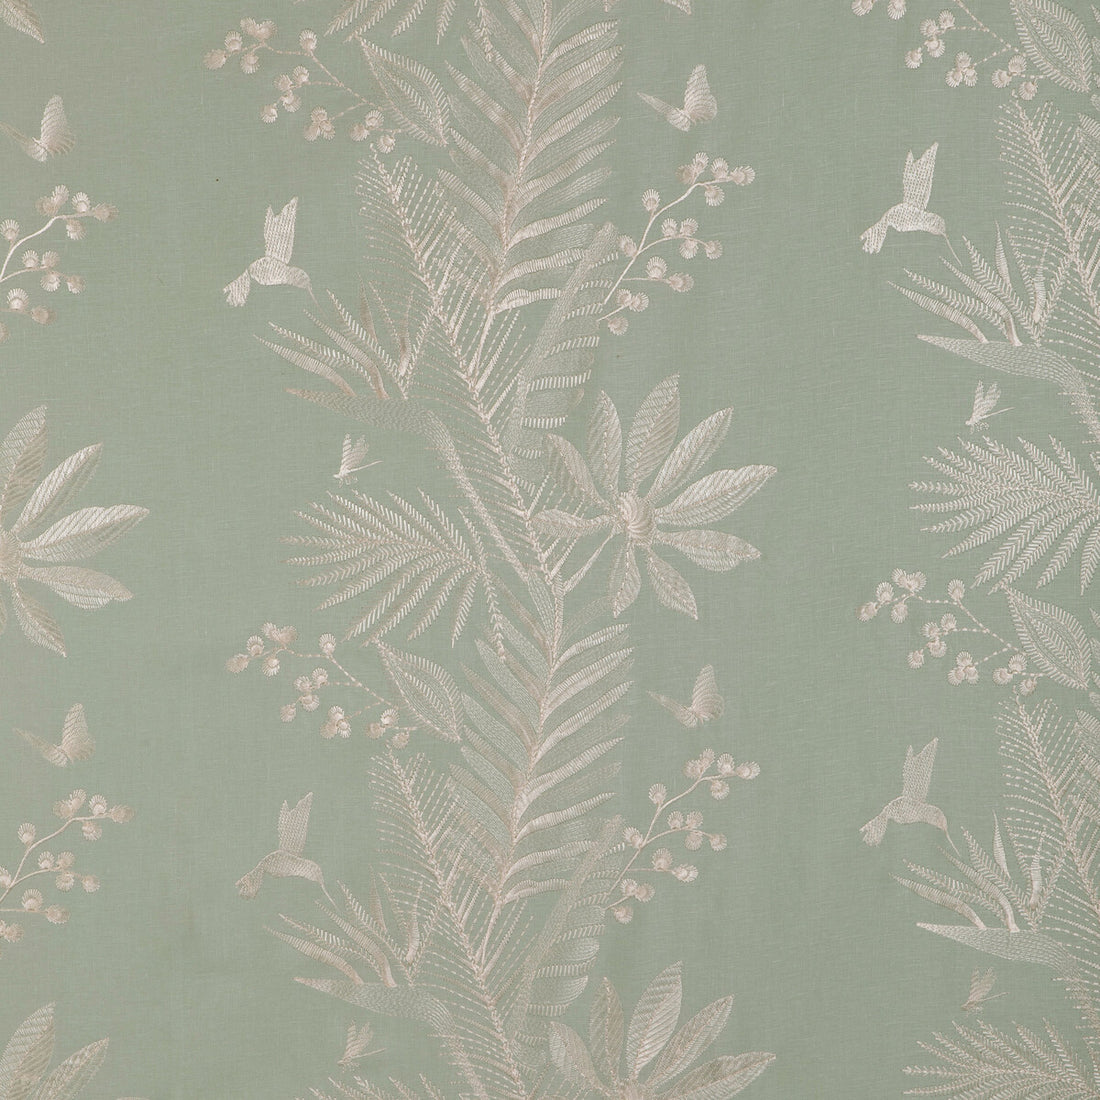 Manda Emb fabric in seafoam color - pattern 8023114.13.0 - by Brunschwig &amp; Fils in the Anduze Embroideries collection